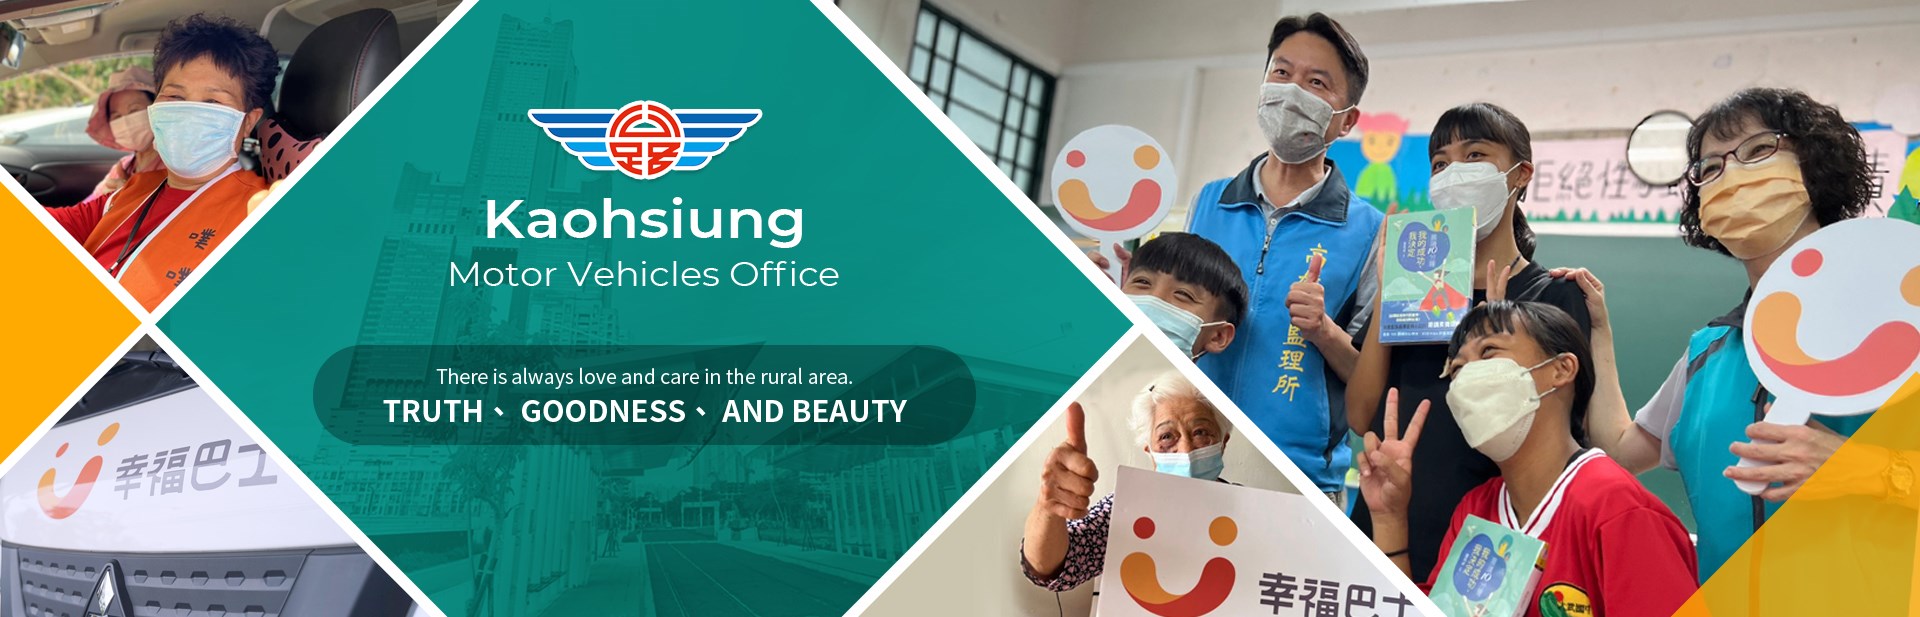 Welcome to Kaohsiung Motor Vehicles Office